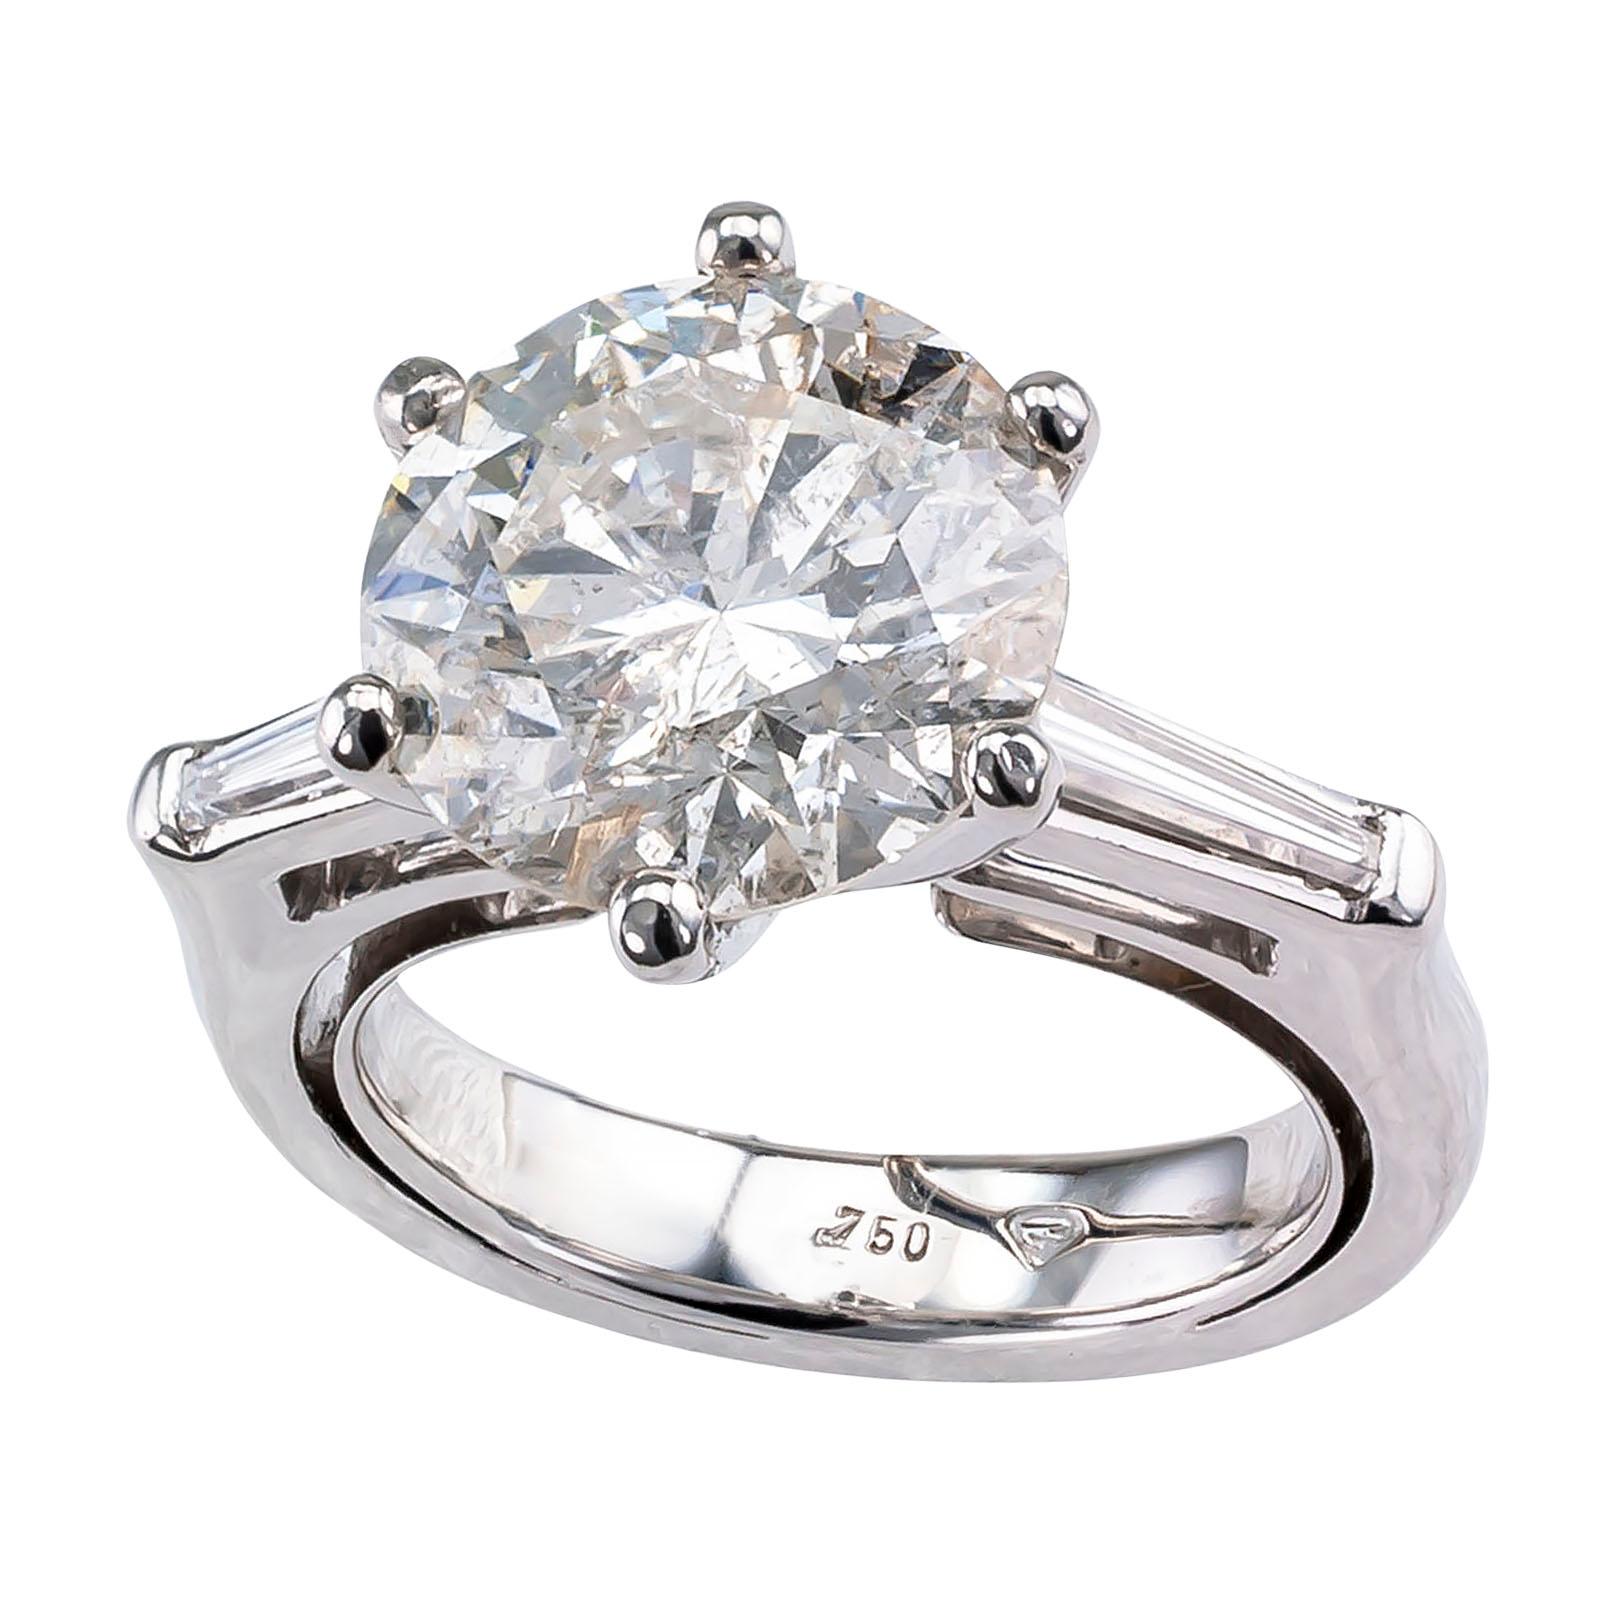 Engagement ring 4.43 carats round diamond solitaire and white gold circa 1970.

DETAILS:

DIAMONDS:  one round brilliant-cut diamond weighing approximately 4.43 carats, accompanied by an appraisal report from EGL-USA stating that the diamond is